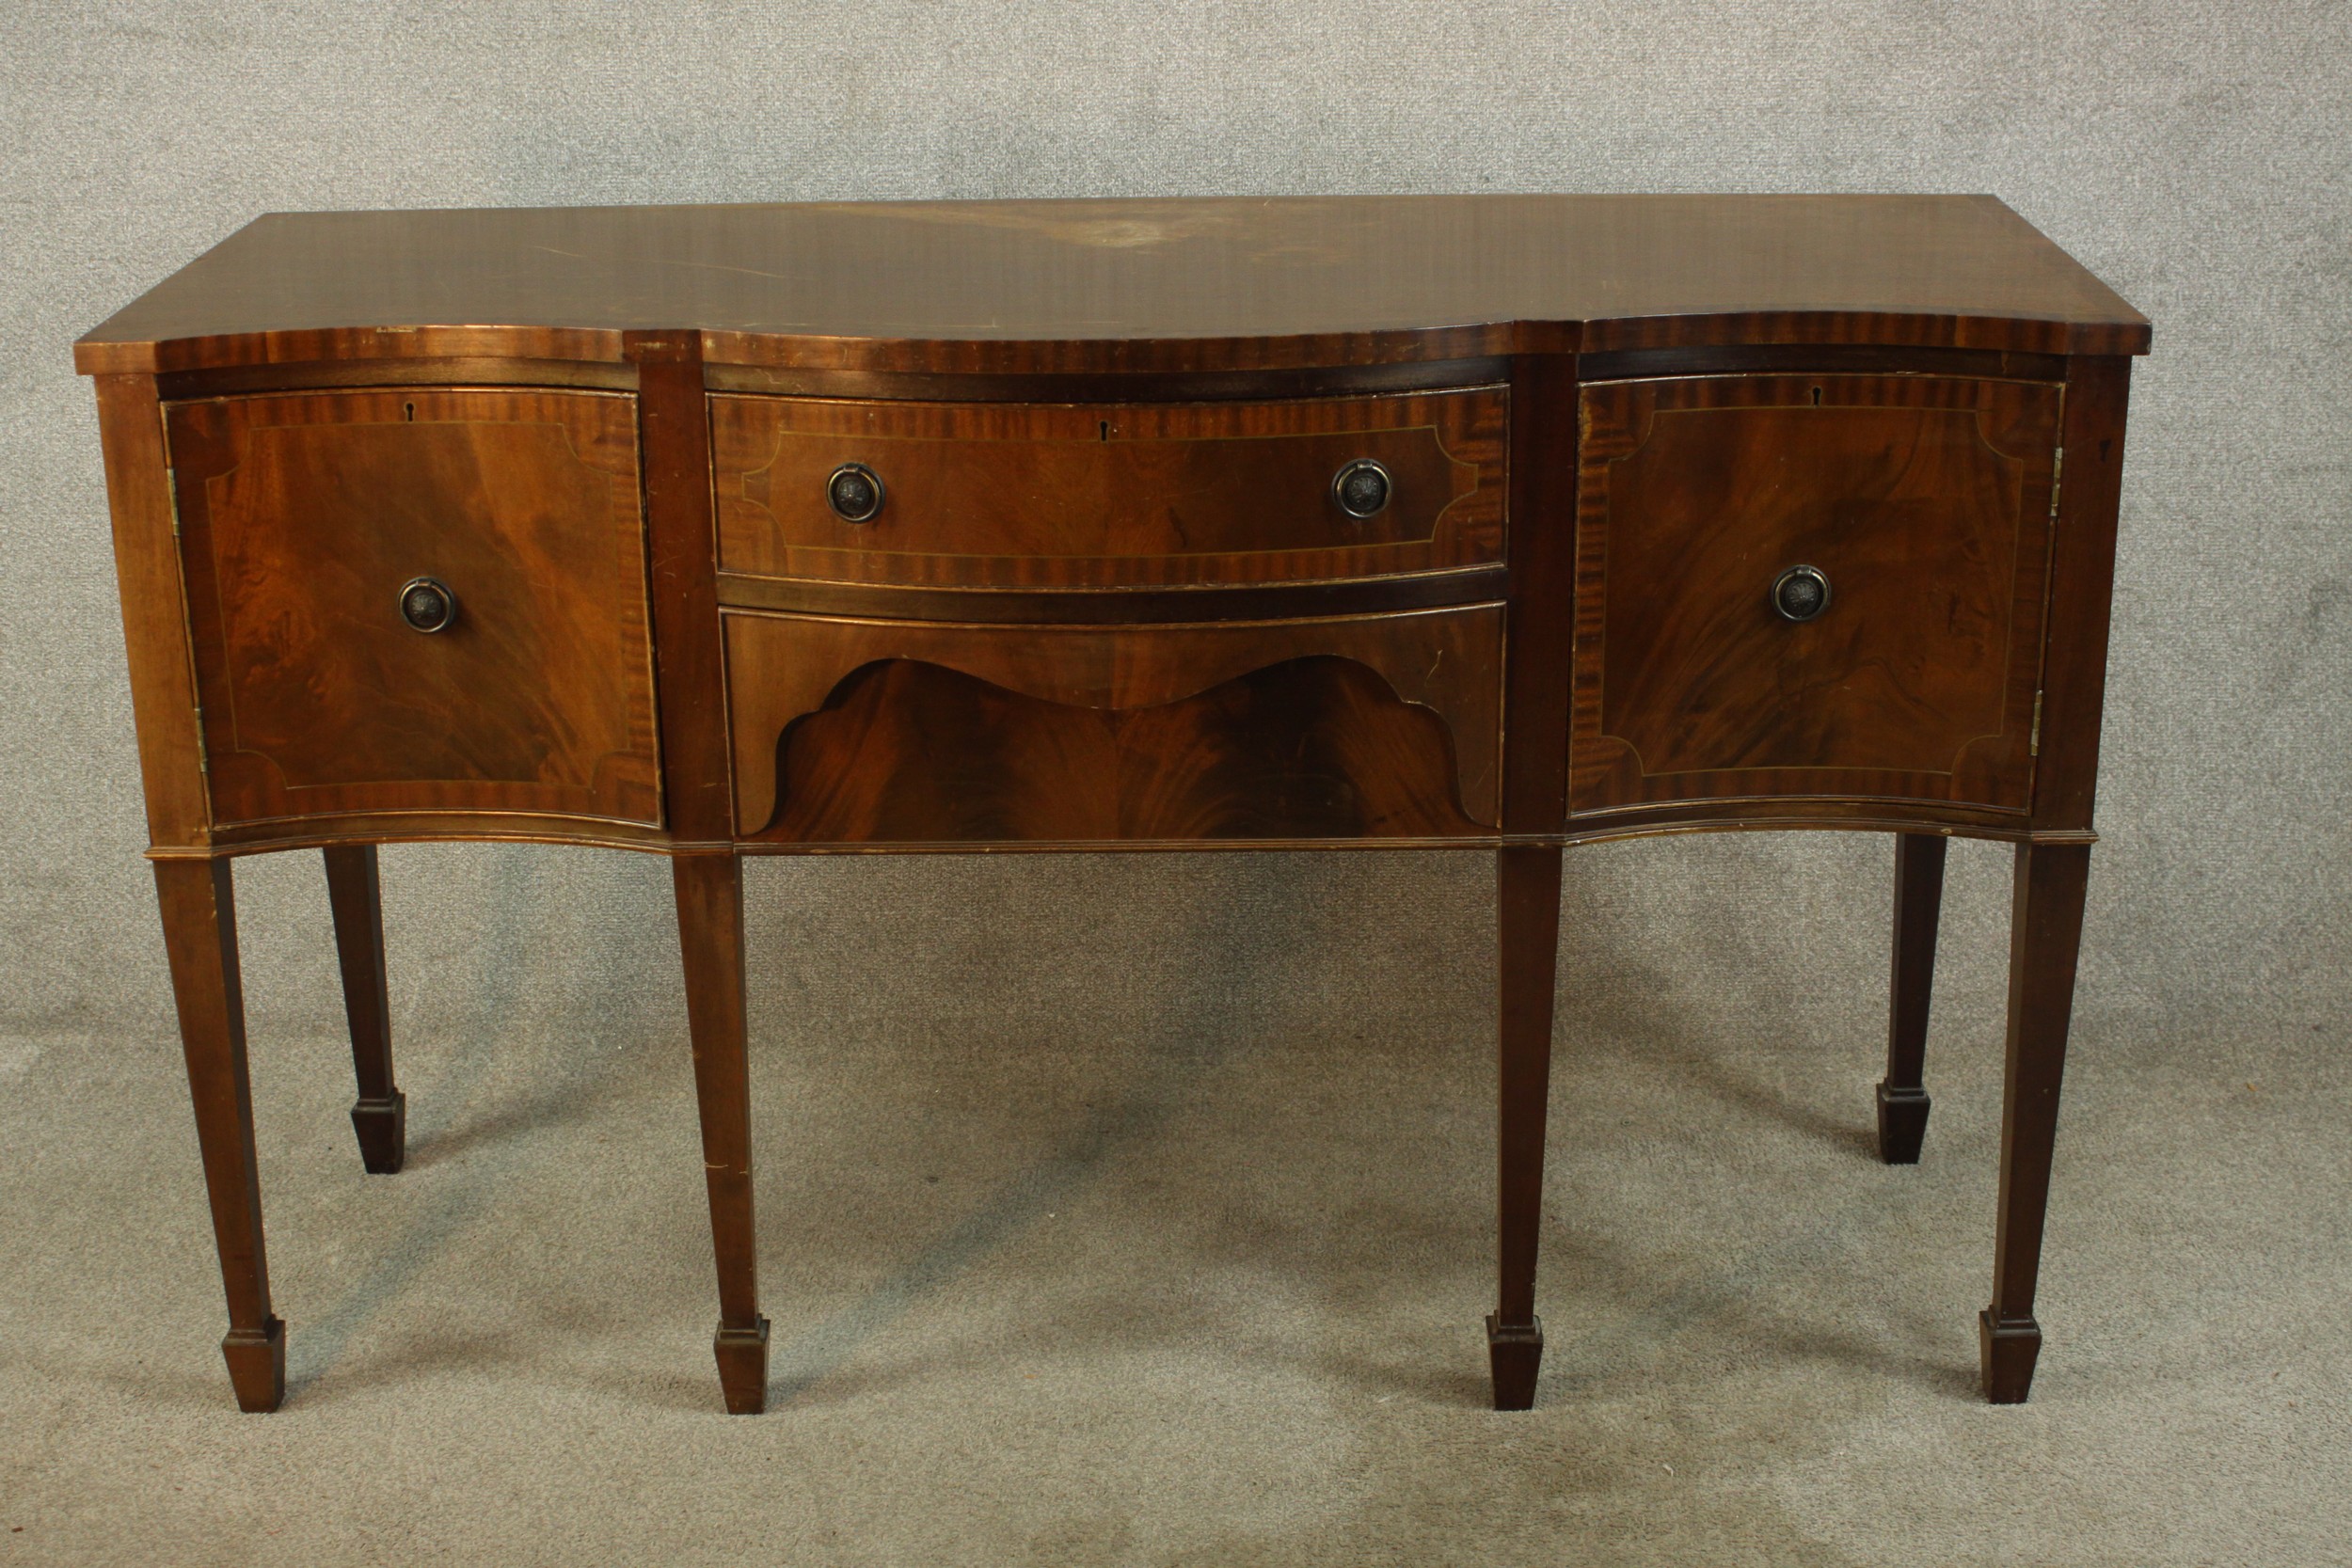 A Regency style mahogany serpentine fronted sideboard, with two central doors flanking two door